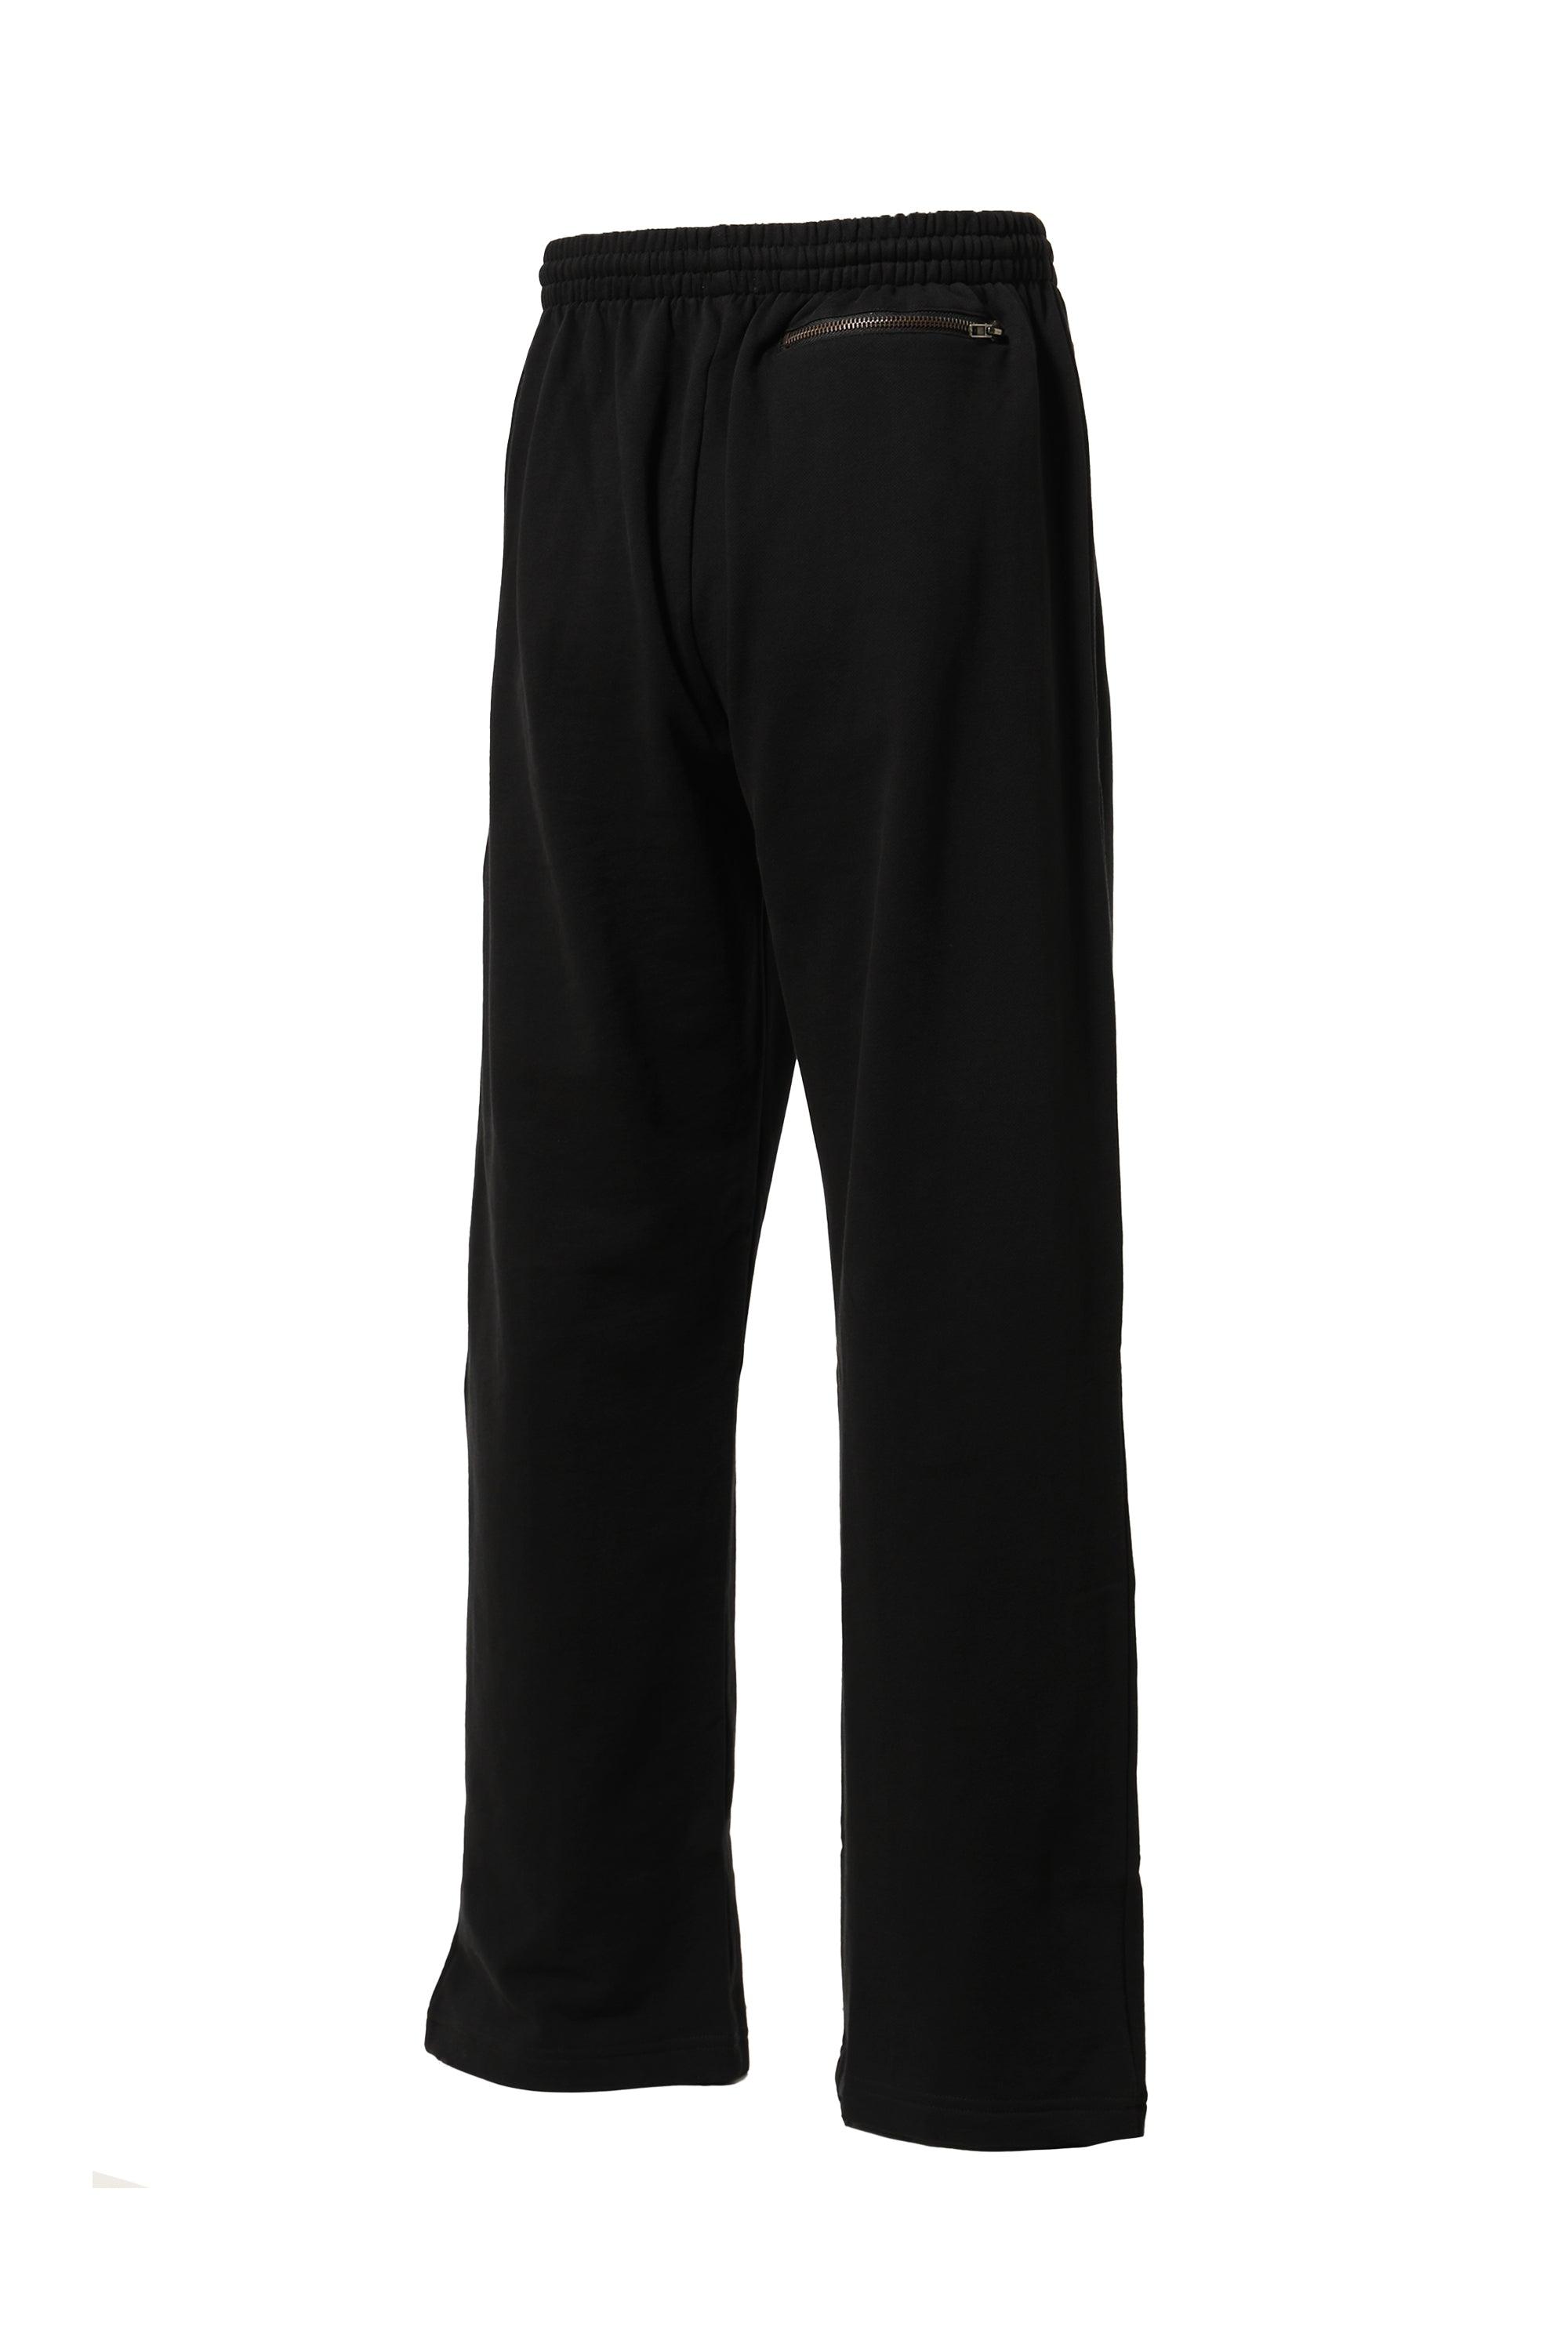 Willy Chavarria Pintuck Sweat Pants in Black for Men | Lyst